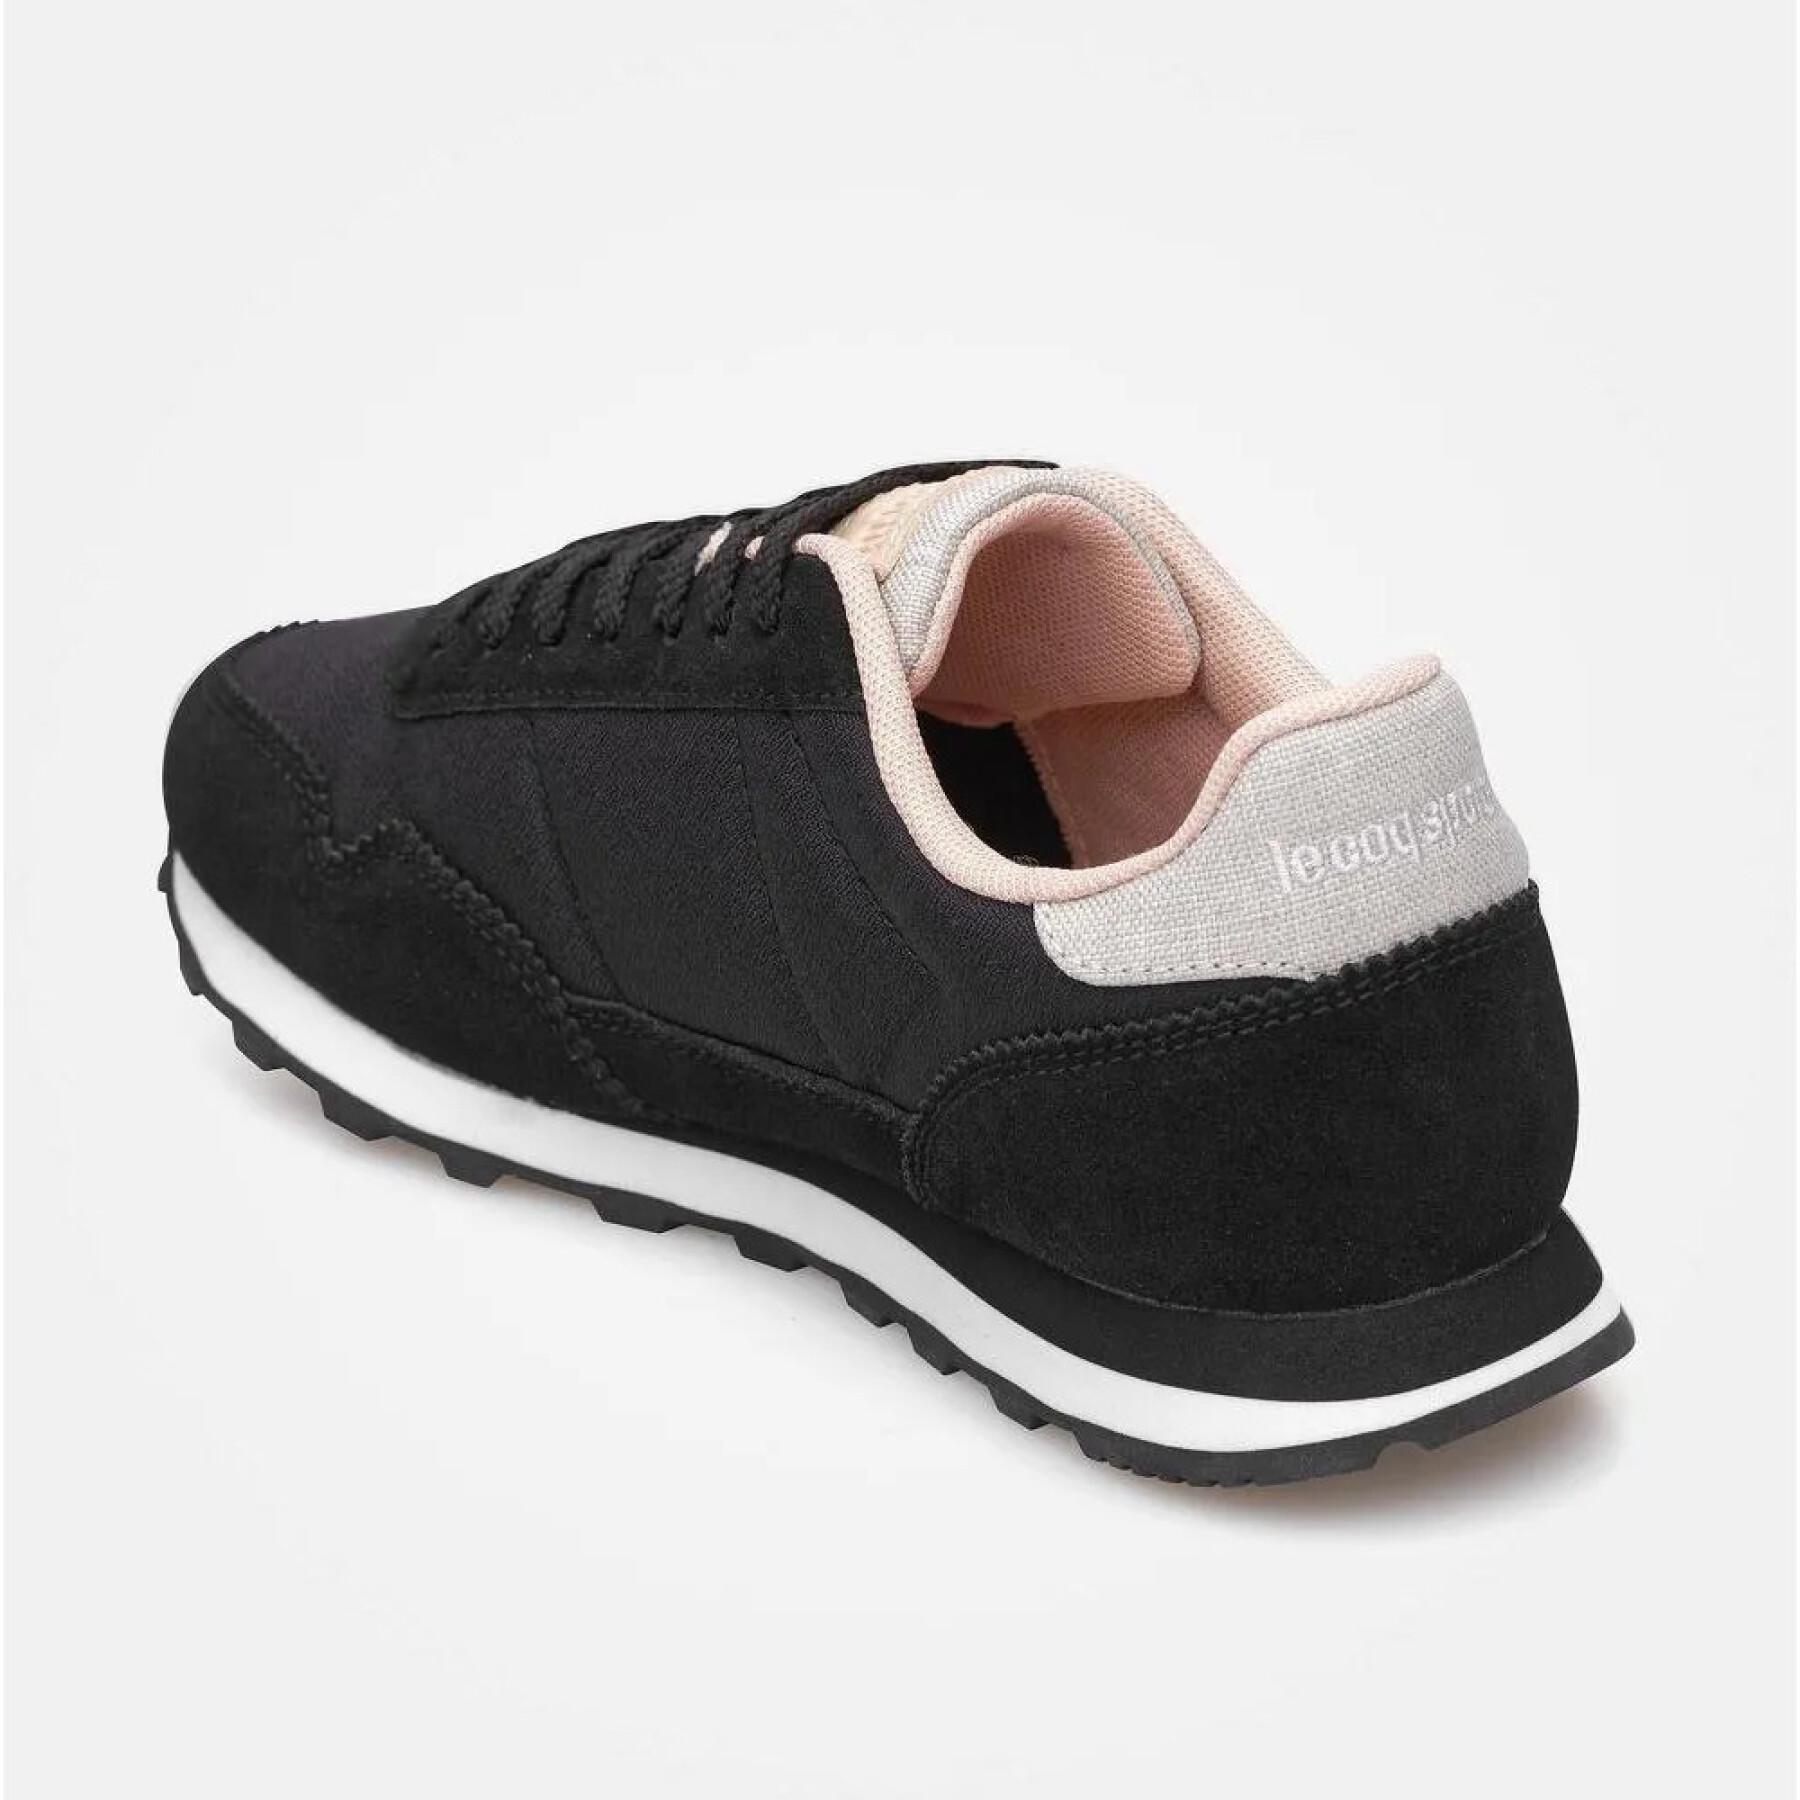 Chaussures femme Le Coq Sportif Astra Brogue